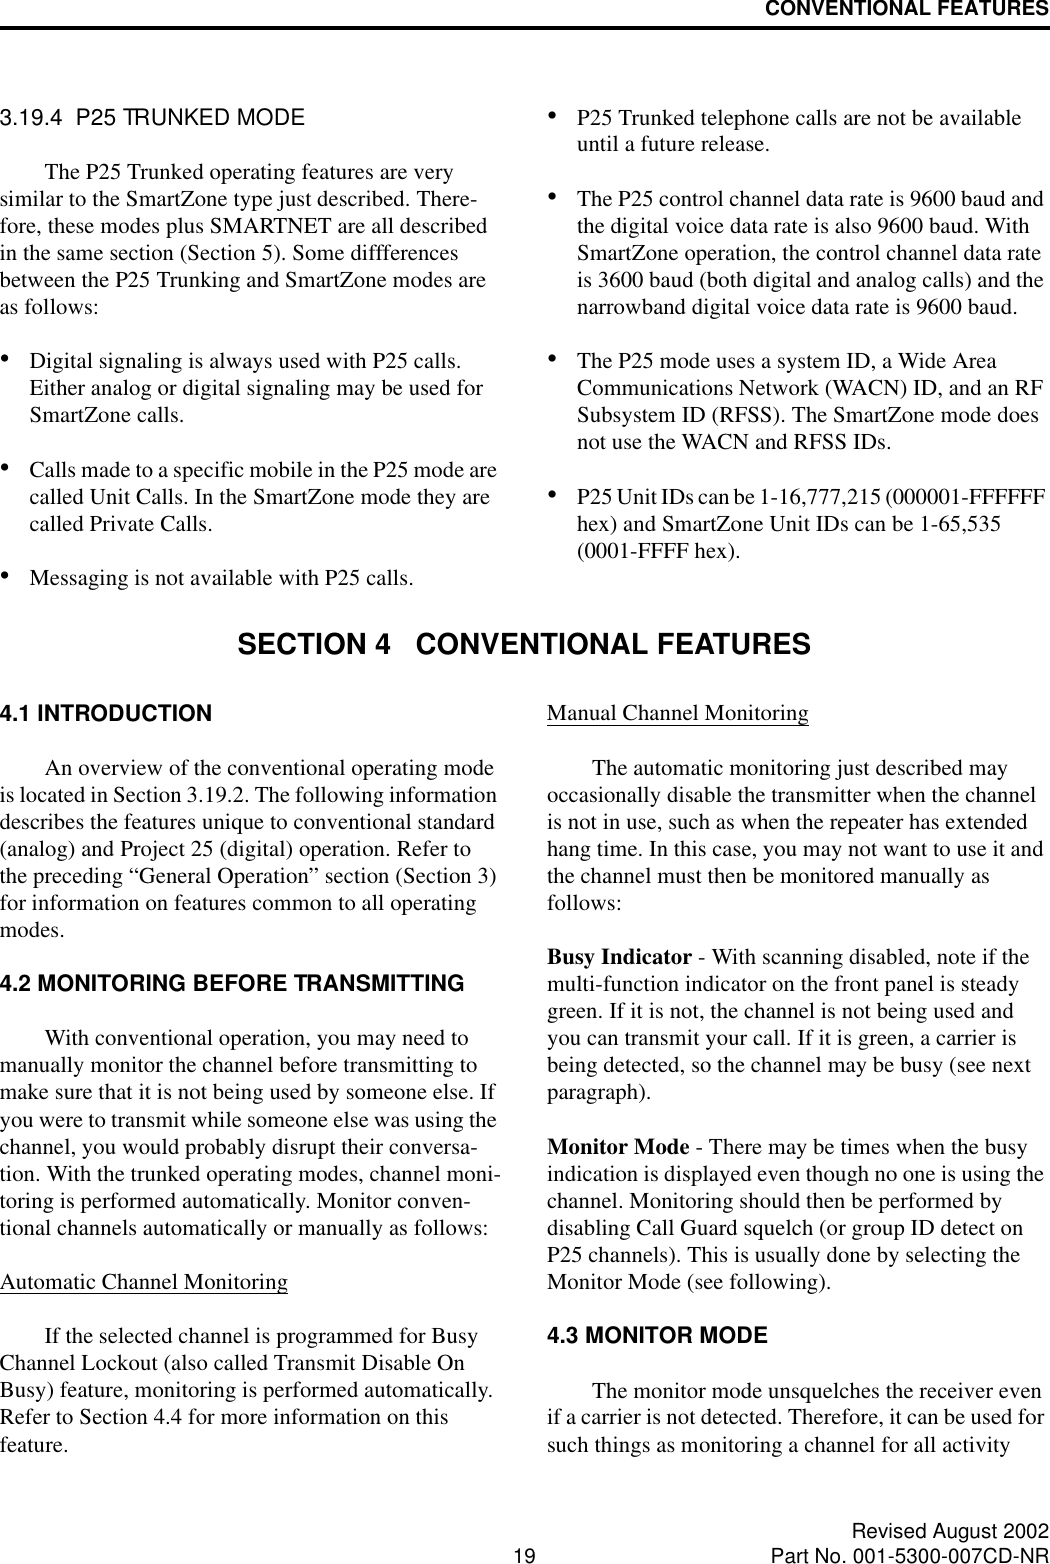 CONVENTIONAL FEATURES19 Revised August 2002Part No. 001-5300-007CD-NR3.19.4  P25 TRUNKED MODEThe P25 Trunked operating features are very similar to the SmartZone type just described. There-fore, these modes plus SMARTNET are all described in the same section (Section 5). Some diffferences between the P25 Trunking and SmartZone modes are as follows:•Digital signaling is always used with P25 calls. Either analog or digital signaling may be used for SmartZone calls.•Calls made to a specific mobile in the P25 mode are called Unit Calls. In the SmartZone mode they are called Private Calls. •Messaging is not available with P25 calls.•P25 Trunked telephone calls are not be available until a future release. •The P25 control channel data rate is 9600 baud and the digital voice data rate is also 9600 baud. With SmartZone operation, the control channel data rate is 3600 baud (both digital and analog calls) and the narrowband digital voice data rate is 9600 baud.•The P25 mode uses a system ID, a Wide Area Communications Network (WACN) ID, and an RF Subsystem ID (RFSS). The SmartZone mode does not use the WACN and RFSS IDs.•P25 Unit IDs can be 1-16,777,215 (000001-FFFFFF hex) and SmartZone Unit IDs can be 1-65,535 (0001-FFFF hex).SECTION 4   CONVENTIONAL FEATURES4.1 INTRODUCTIONAn overview of the conventional operating mode is located in Section 3.19.2. The following information describes the features unique to conventional standard (analog) and Project 25 (digital) operation. Refer to the preceding “General Operation” section (Section 3) for information on features common to all operating modes.4.2 MONITORING BEFORE TRANSMITTINGWith conventional operation, you may need to manually monitor the channel before transmitting to make sure that it is not being used by someone else. If you were to transmit while someone else was using the channel, you would probably disrupt their conversa-tion. With the trunked operating modes, channel moni-toring is performed automatically. Monitor conven-tional channels automatically or manually as follows:Automatic Channel MonitoringIf the selected channel is programmed for Busy Channel Lockout (also called Transmit Disable On Busy) feature, monitoring is performed automatically. Refer to Section 4.4 for more information on this feature.Manual Channel MonitoringThe automatic monitoring just described may occasionally disable the transmitter when the channel is not in use, such as when the repeater has extended hang time. In this case, you may not want to use it and the channel must then be monitored manually as follows:Busy Indicator - With scanning disabled, note if the multi-function indicator on the front panel is steady green. If it is not, the channel is not being used and you can transmit your call. If it is green, a carrier is being detected, so the channel may be busy (see next paragraph). Monitor Mode - There may be times when the busy indication is displayed even though no one is using the channel. Monitoring should then be performed by disabling Call Guard squelch (or group ID detect on P25 channels). This is usually done by selecting the Monitor Mode (see following). 4.3 MONITOR MODEThe monitor mode unsquelches the receiver even if a carrier is not detected. Therefore, it can be used for such things as monitoring a channel for all activity 